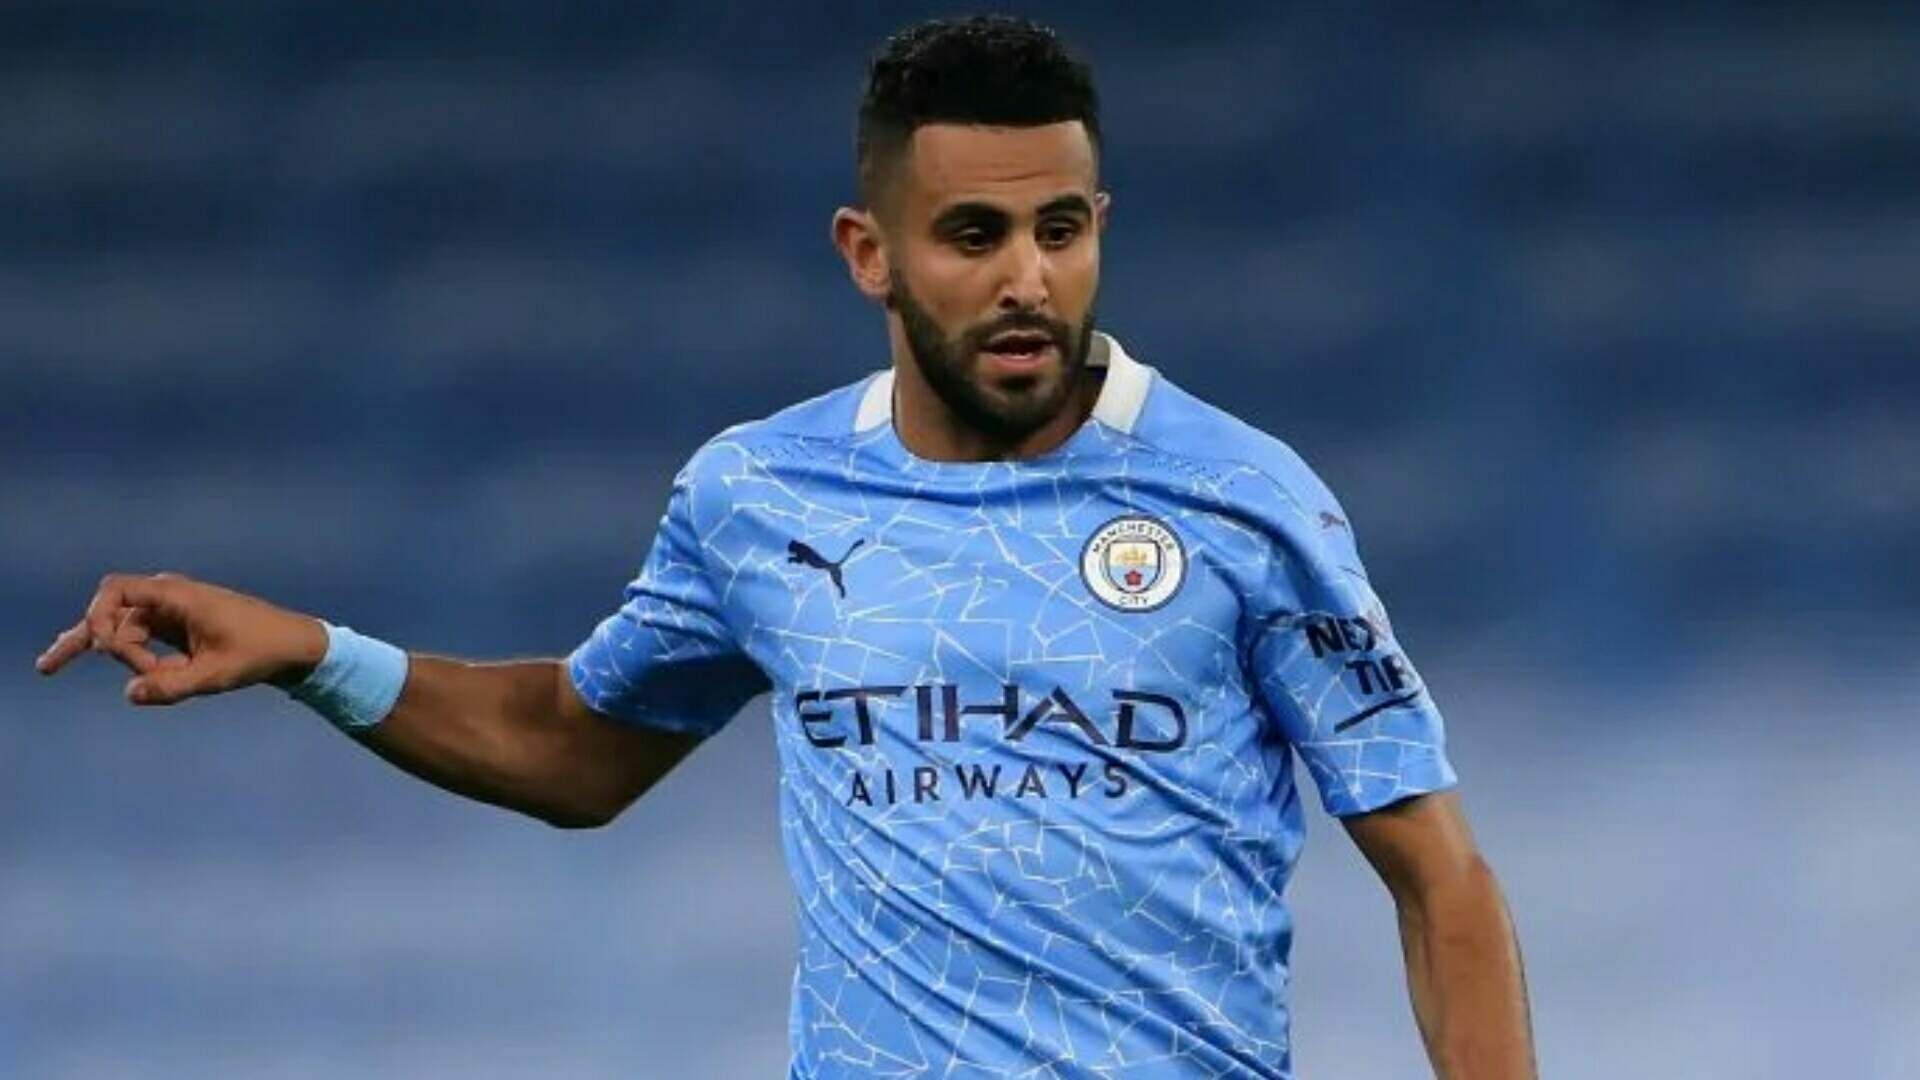 Riyad Mahrez in action for Manchester City in the Premier League